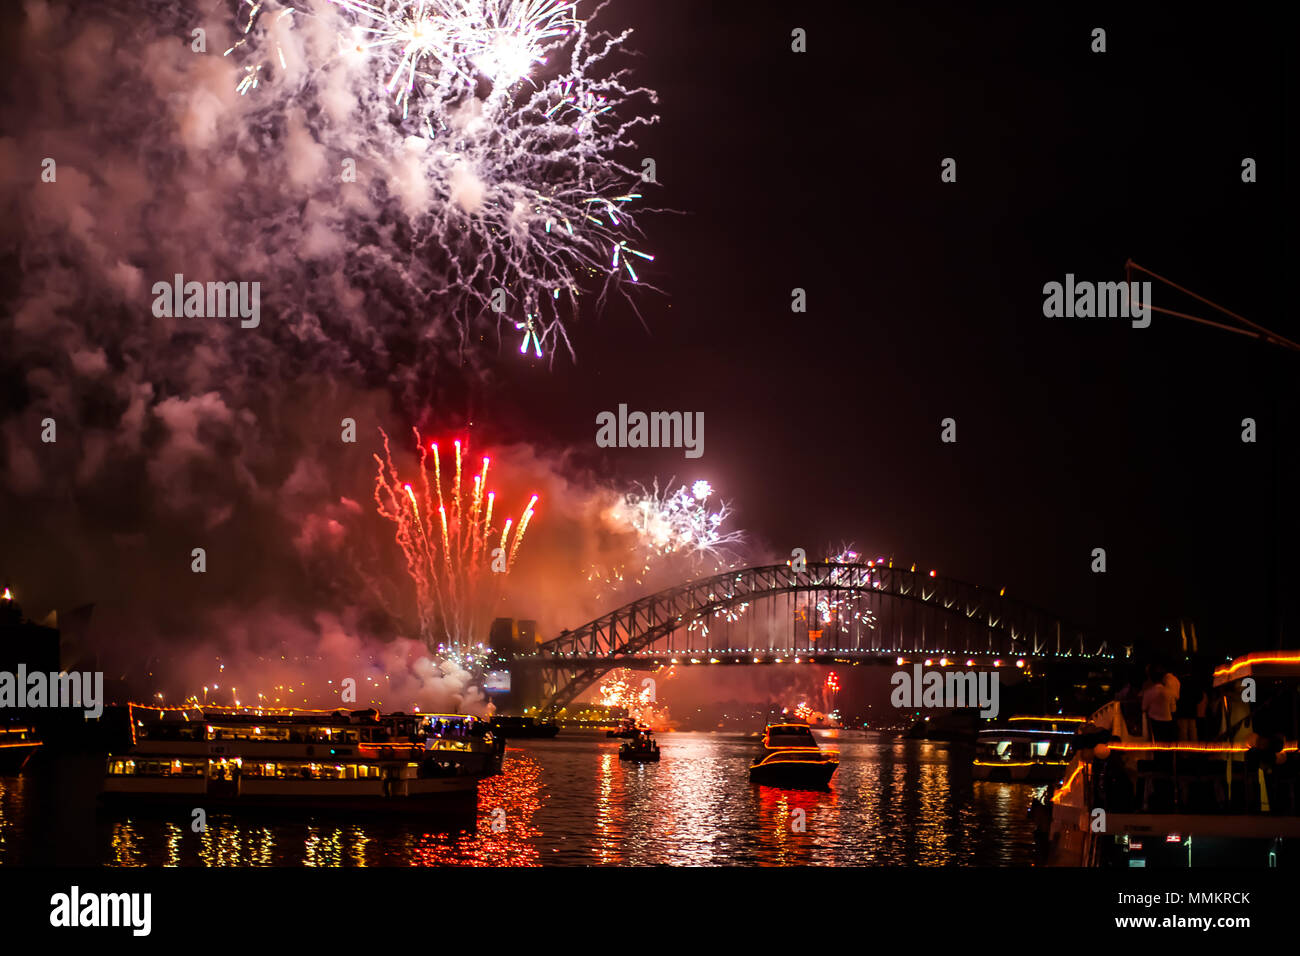 Sydney, Australia - January 1, 2015: Fireworks with boats parade at Harbour Bridge in Sydney bay at midnight for the new years eve 2015, shot from a b Stock Photo